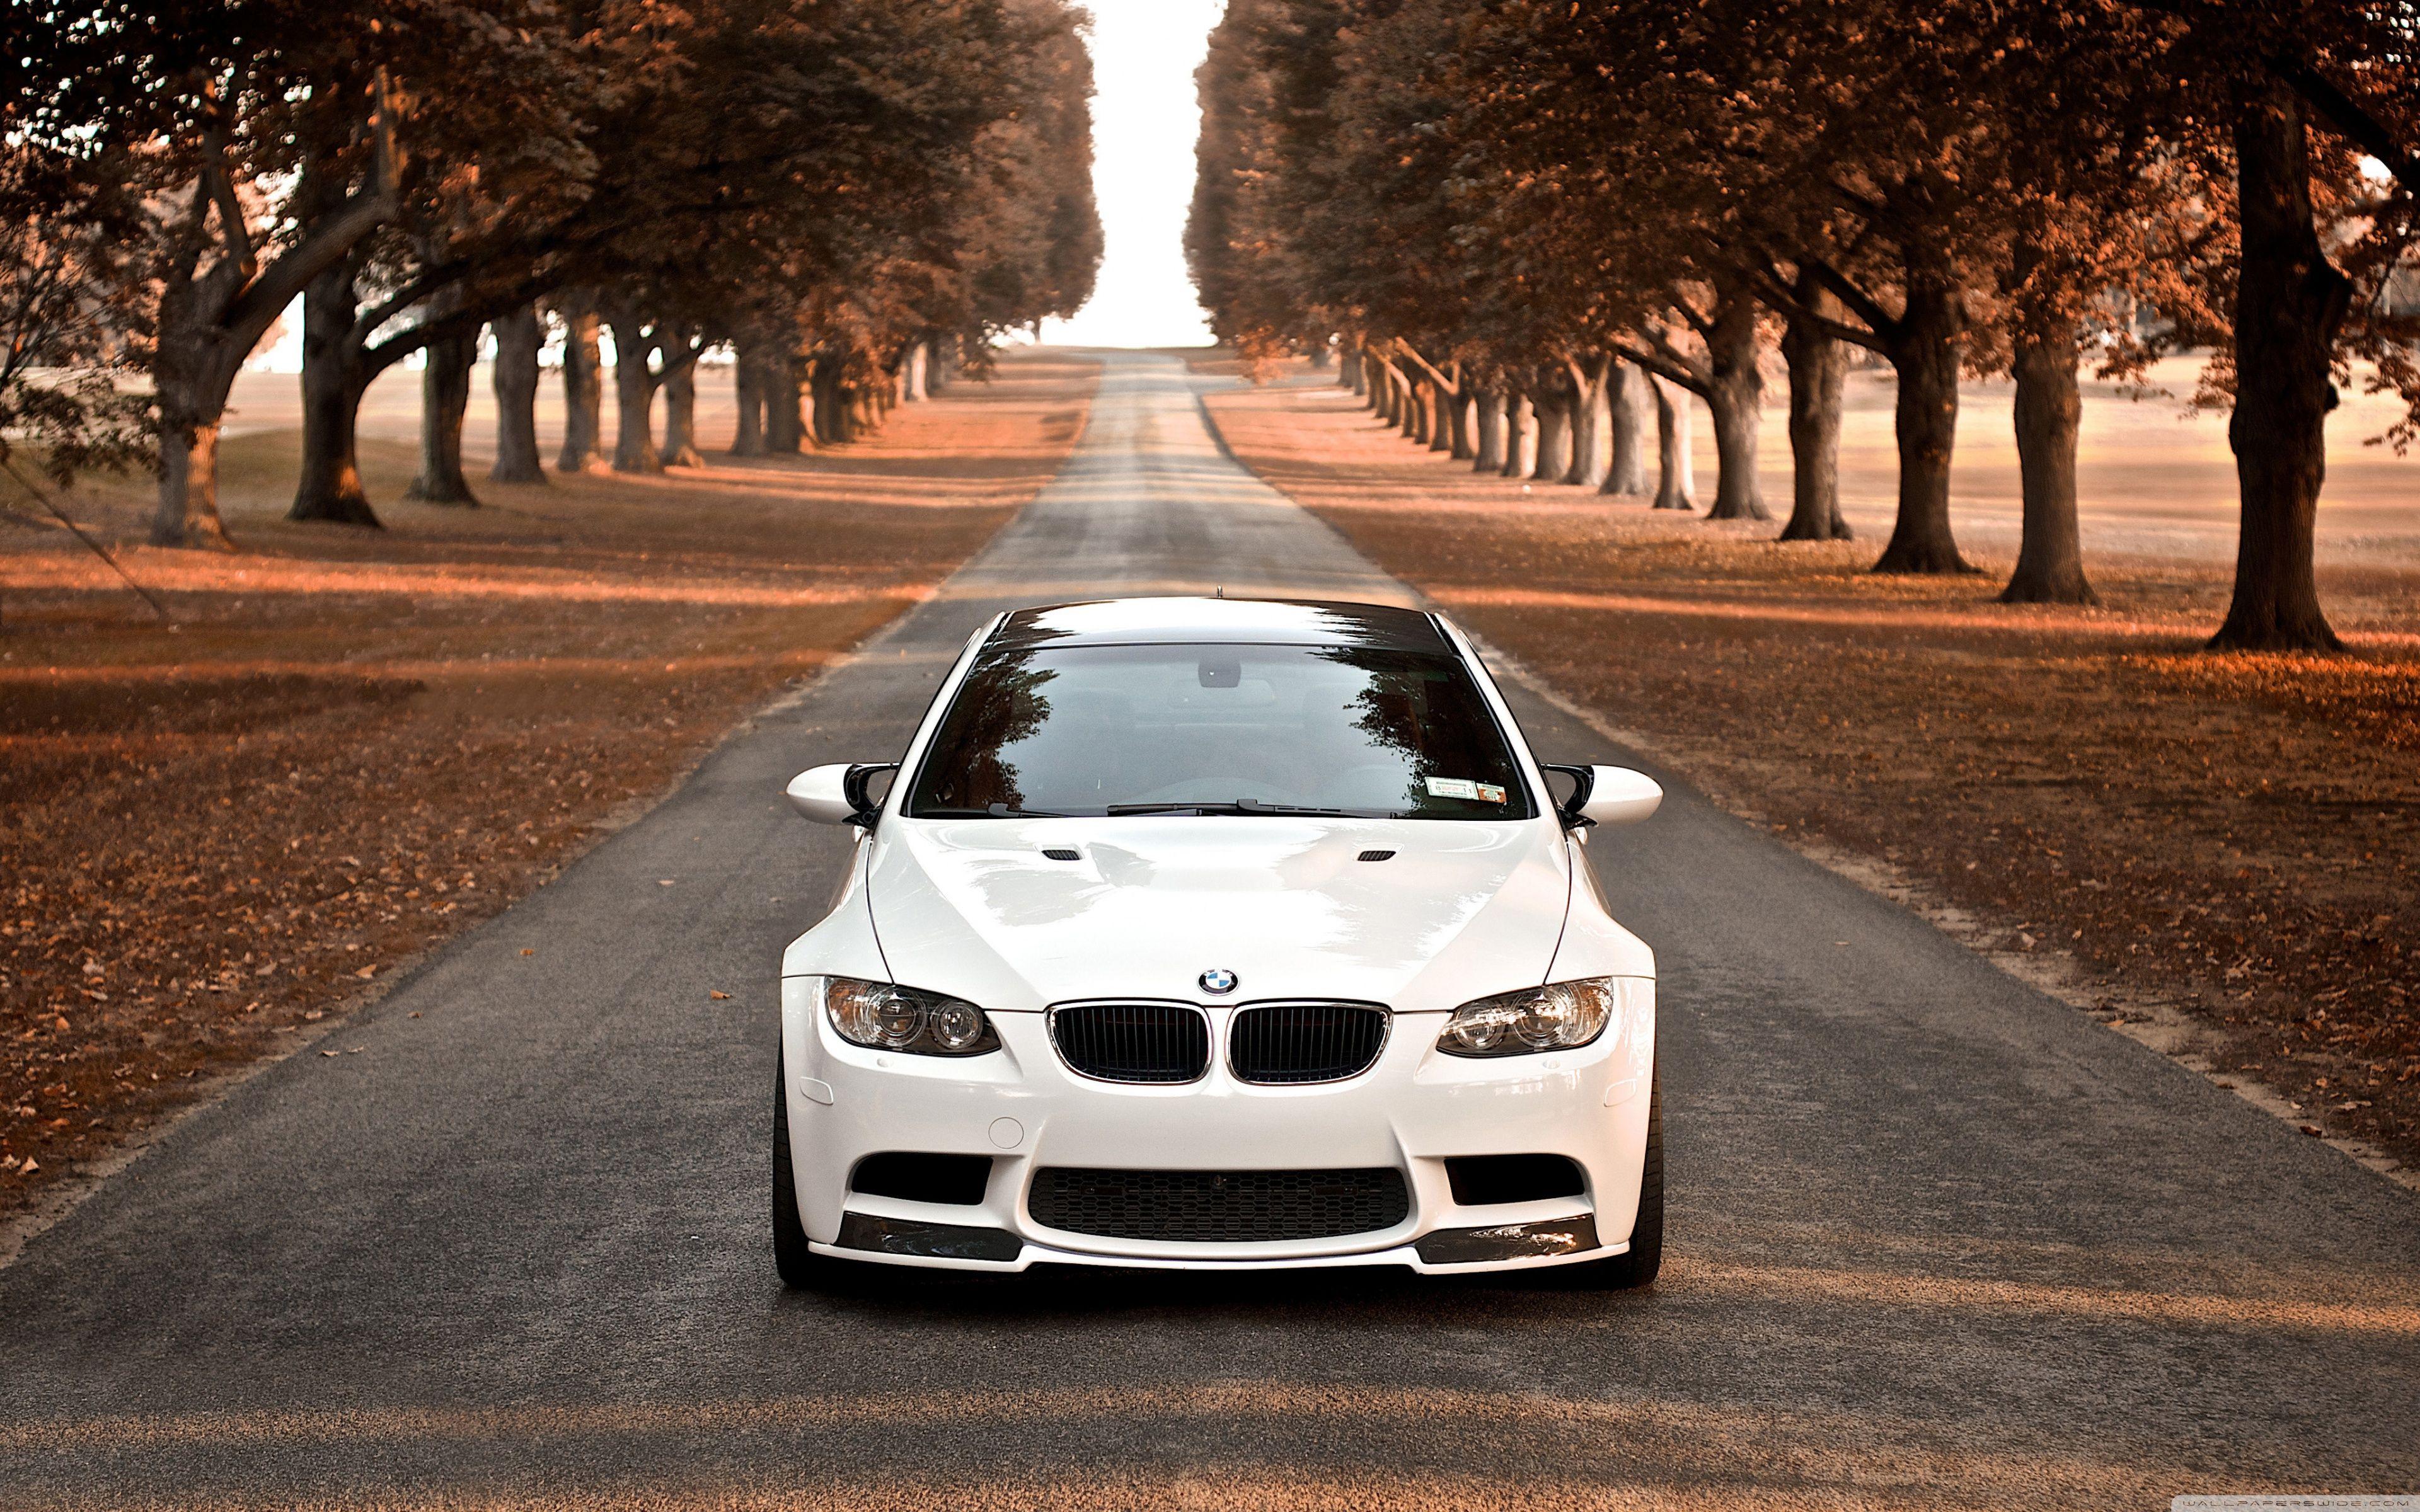 Bmw Wallpaper Pictures  Download Free Images on Unsplash